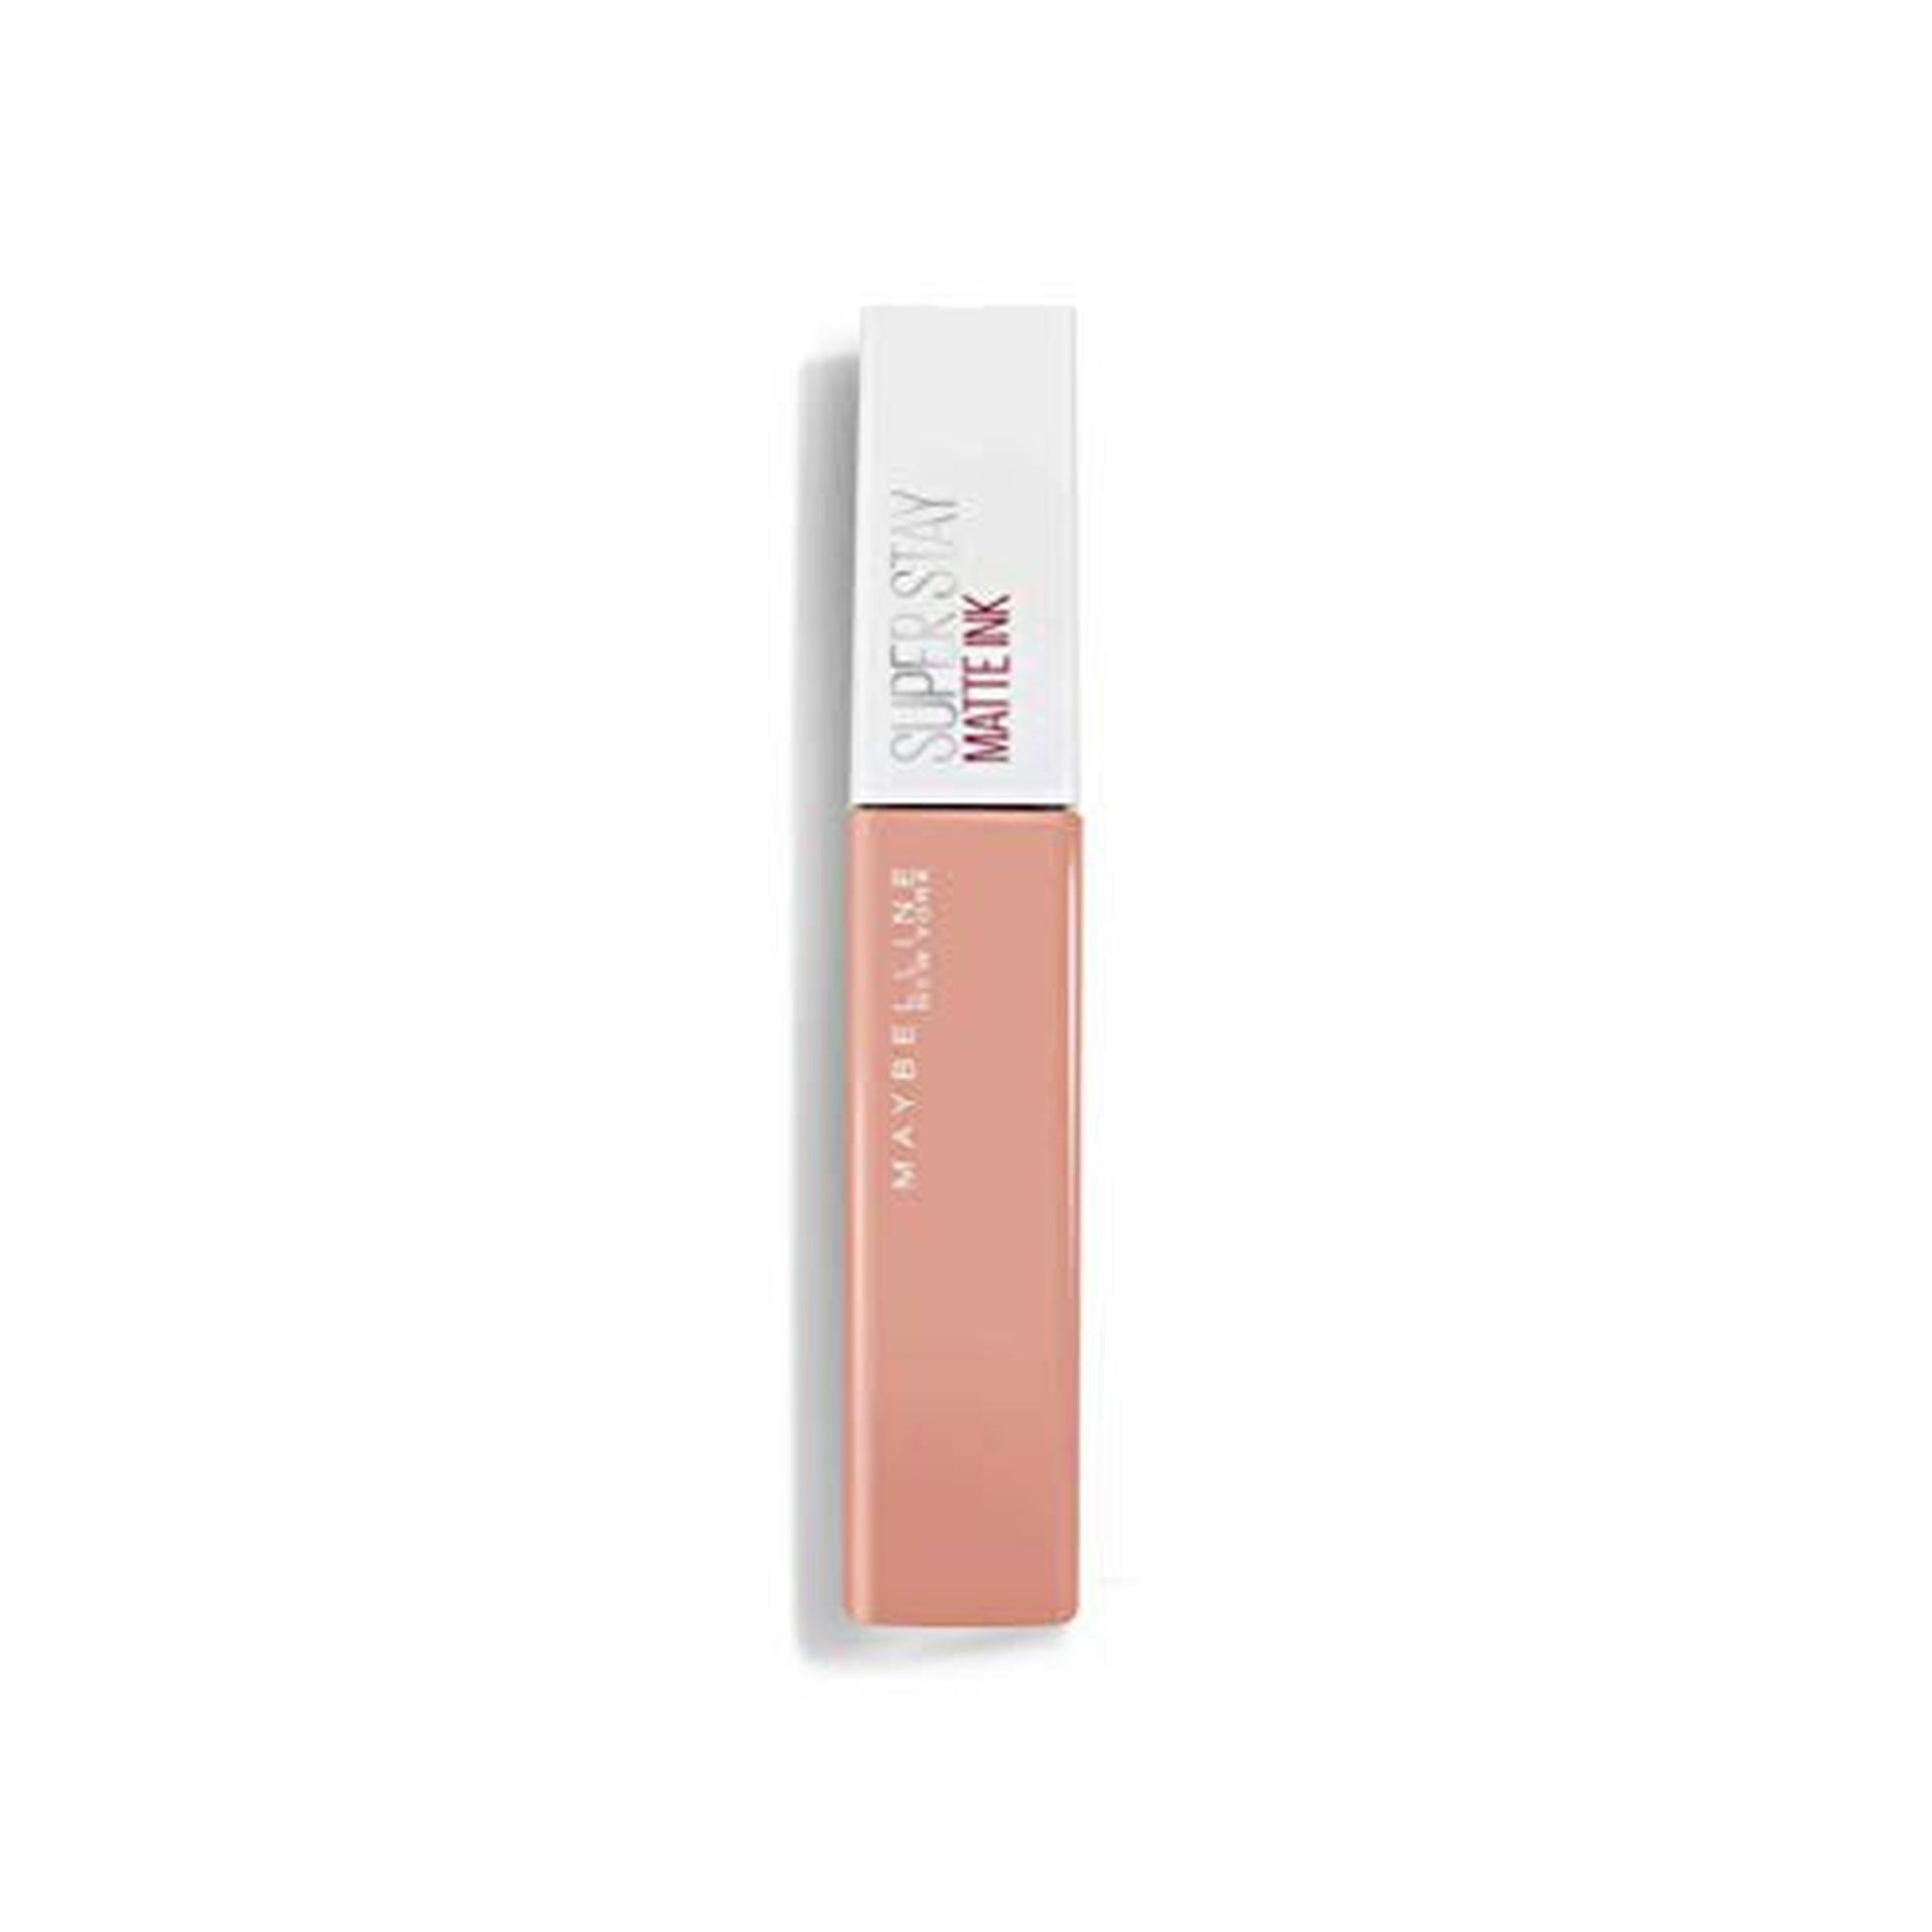 MAYBELLINE SuperStay Matte Ink - 55 Driver-Maybelline-BeautyNmakeup.co.uk